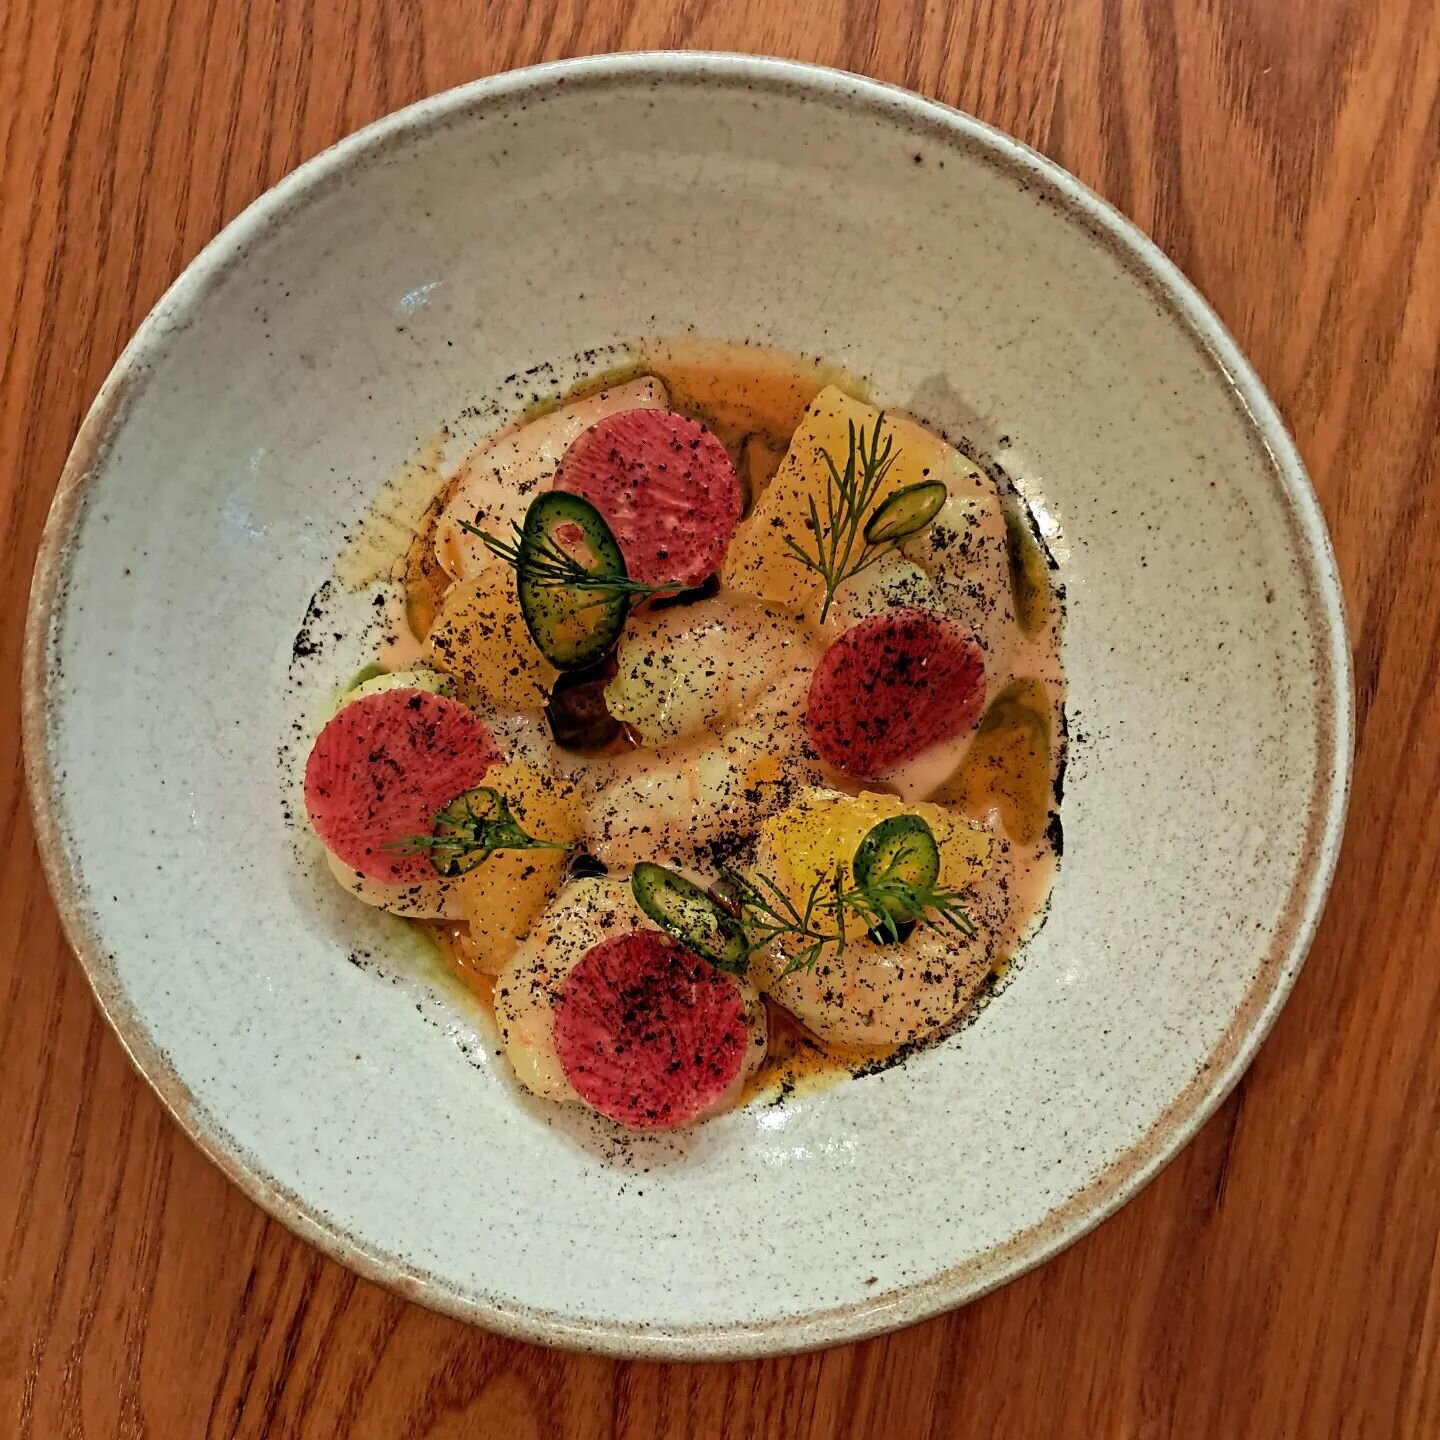 Our Newest Addition!

Prawn Cevice with rhubarb leche de tigre &amp; Orange

Book a table on opentable or by giving us a call and give it a taste